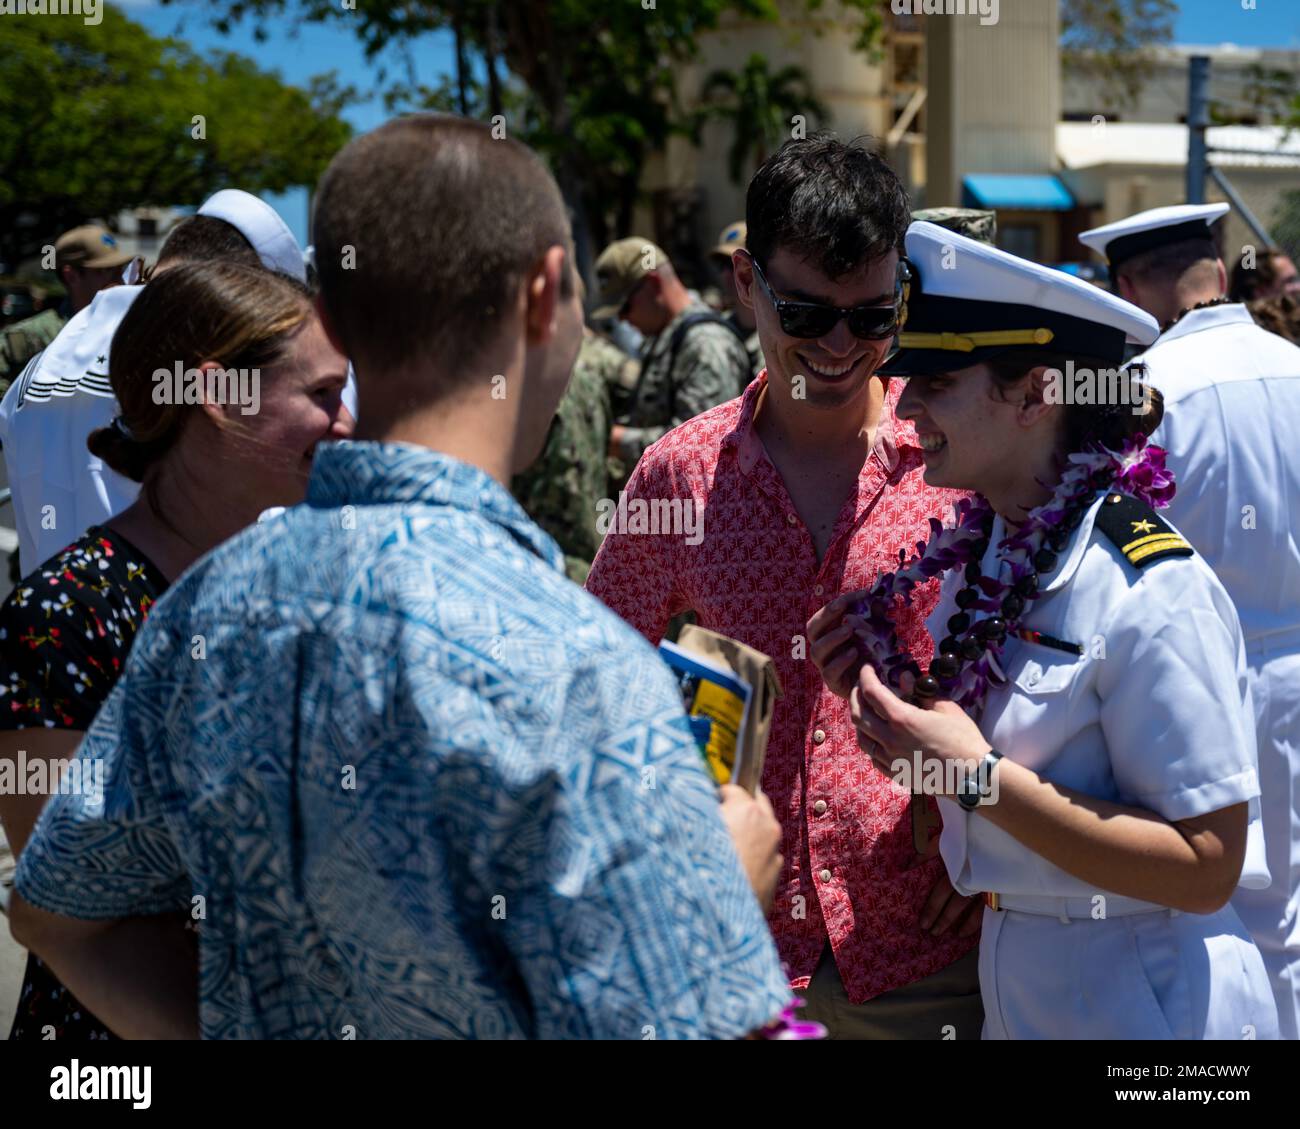 220525-N-LN285-2332 JOINT BASE PEARL HARBOR-HICKAM (May 25, 2022) --  Lt.j.g. Sabella Norton, from Merritt Island, Fla., assigned to the Virginia-class fast-attack submarine USS North Carolina (SSN 777) reunites with her family after the boat returns to Joint Base Pearl Harbor-Hickam from deployment in the 7th Fleet area of responsibility. North Carolina performed a full spectrum of operations, including anti-submarine and anti-surface warfare, during the extended seven-month, Indo-Pacific deployment. Stock Photo